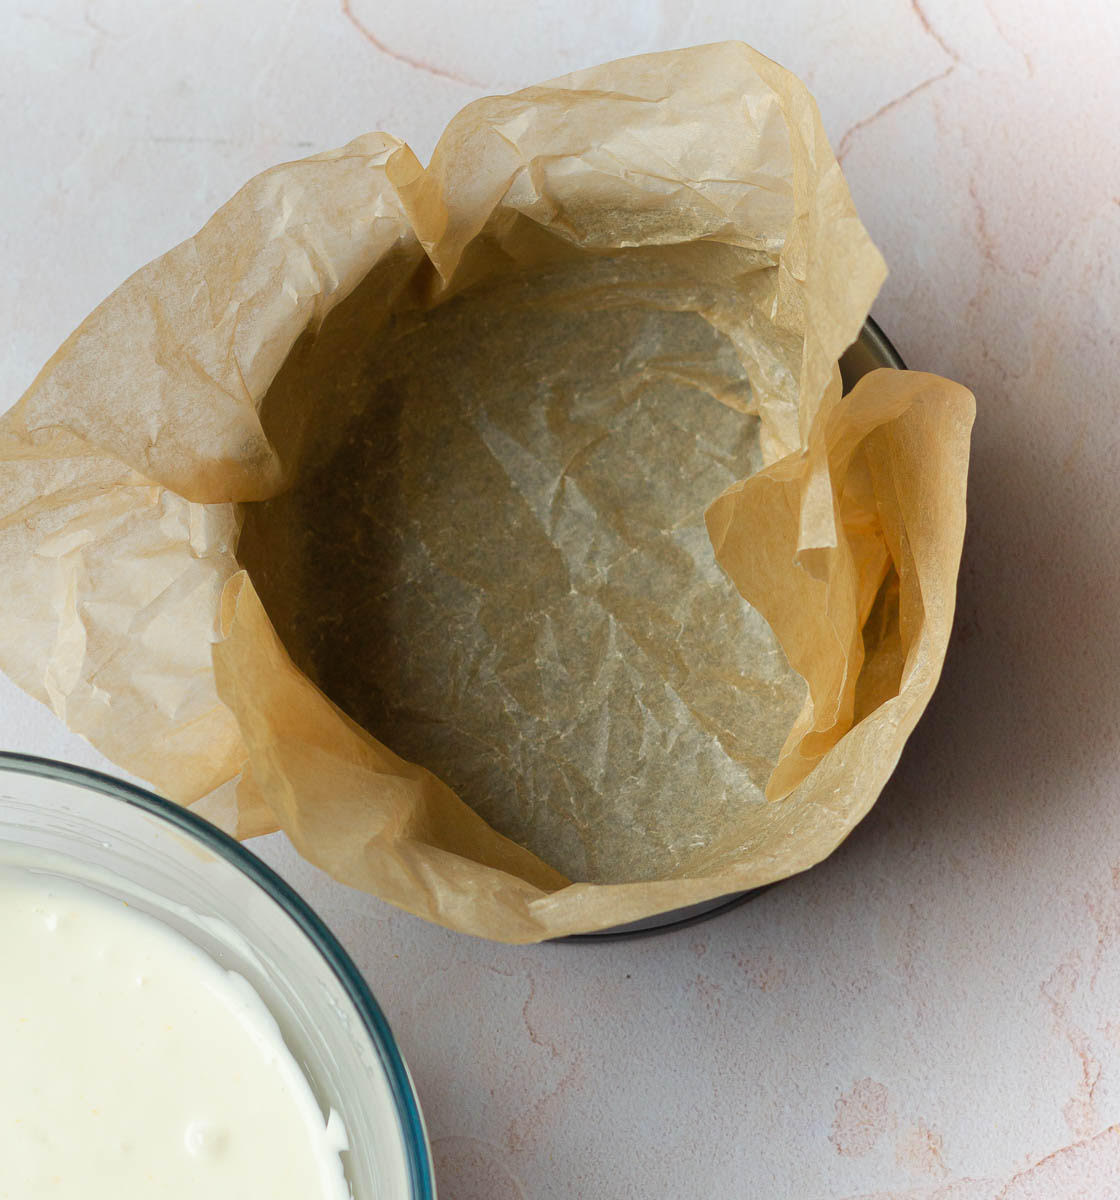 Line the cake tin with parchment paper